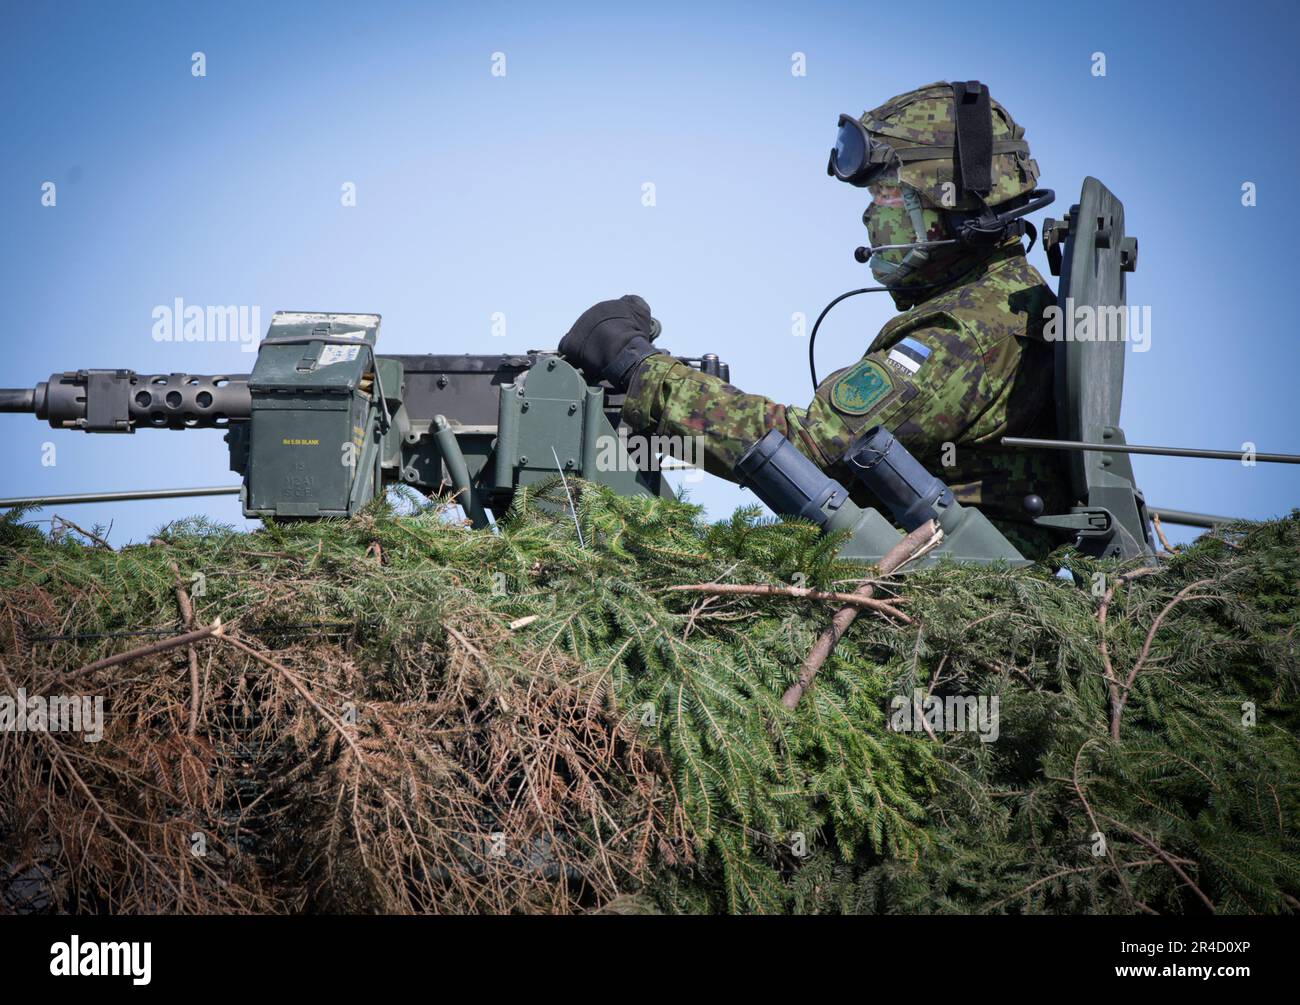 An Estonian soldier is seen in a camouflaged armoured personnel carrier in Tapa, Estonia on 20 May, 2023. Estonia is hosting the Spring Storm NATO exercises involving over 13 thousand personnel with US, German, British, French and Polish forces training together with the Estonian Defence Forces (eDF). (Photo by Jaap Arriens / Sipa USA) Stock Photo